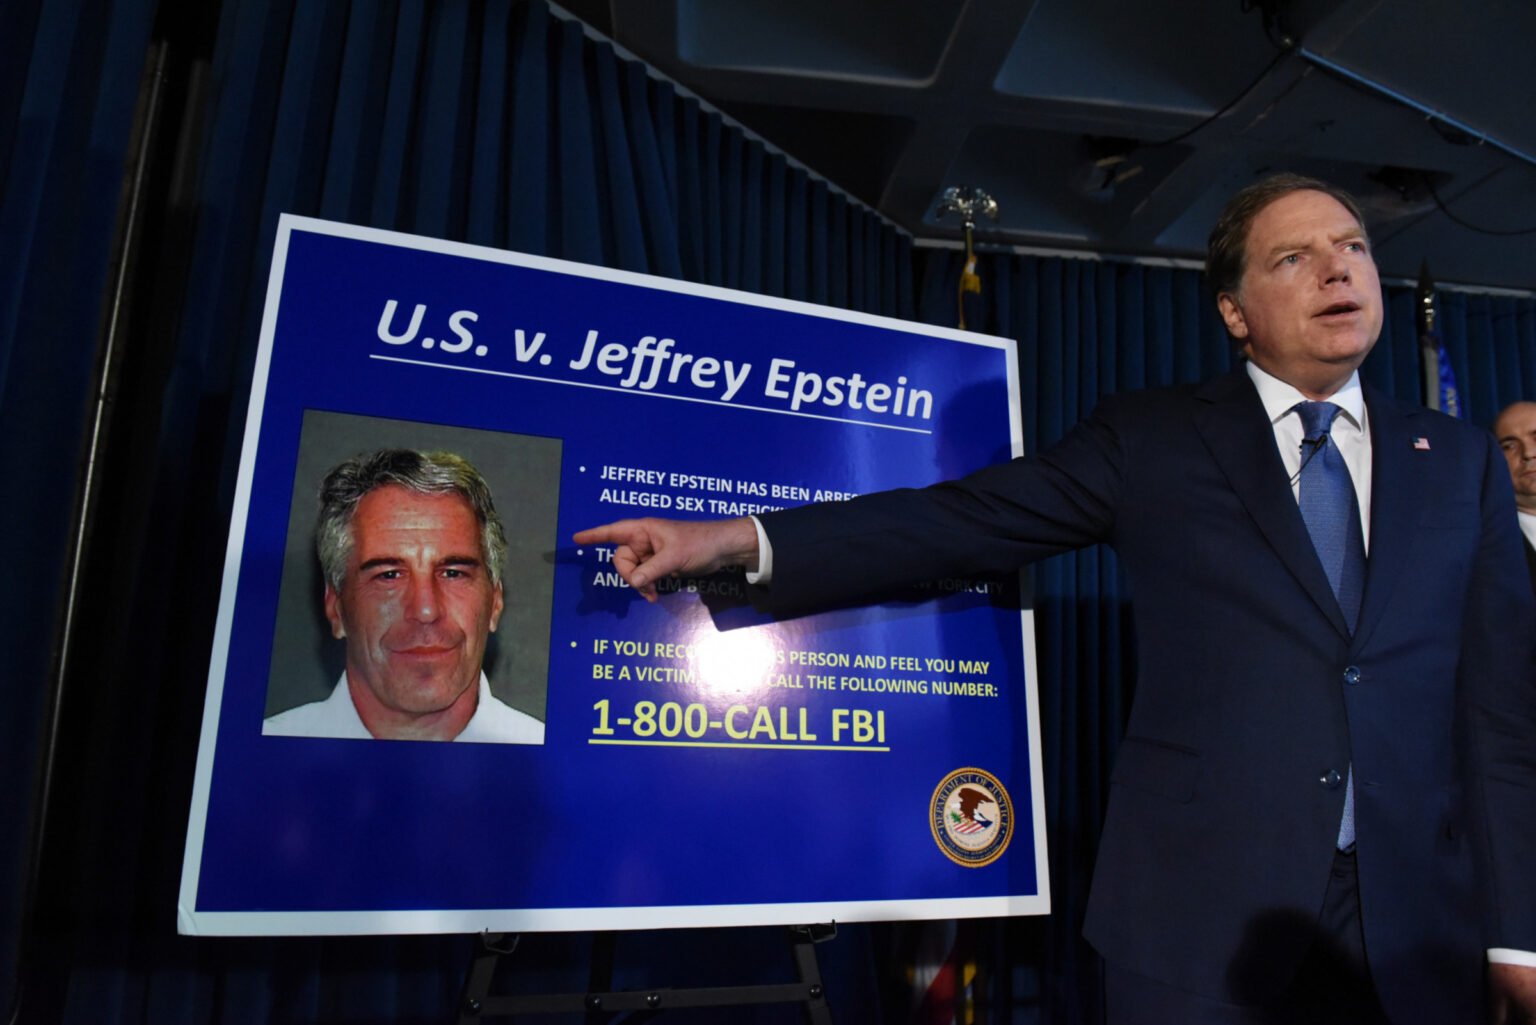 Did you know that Harvard and other top universities accepted donations from Jeffrey Epstein? Learn about Epstein's connections to higher education here.